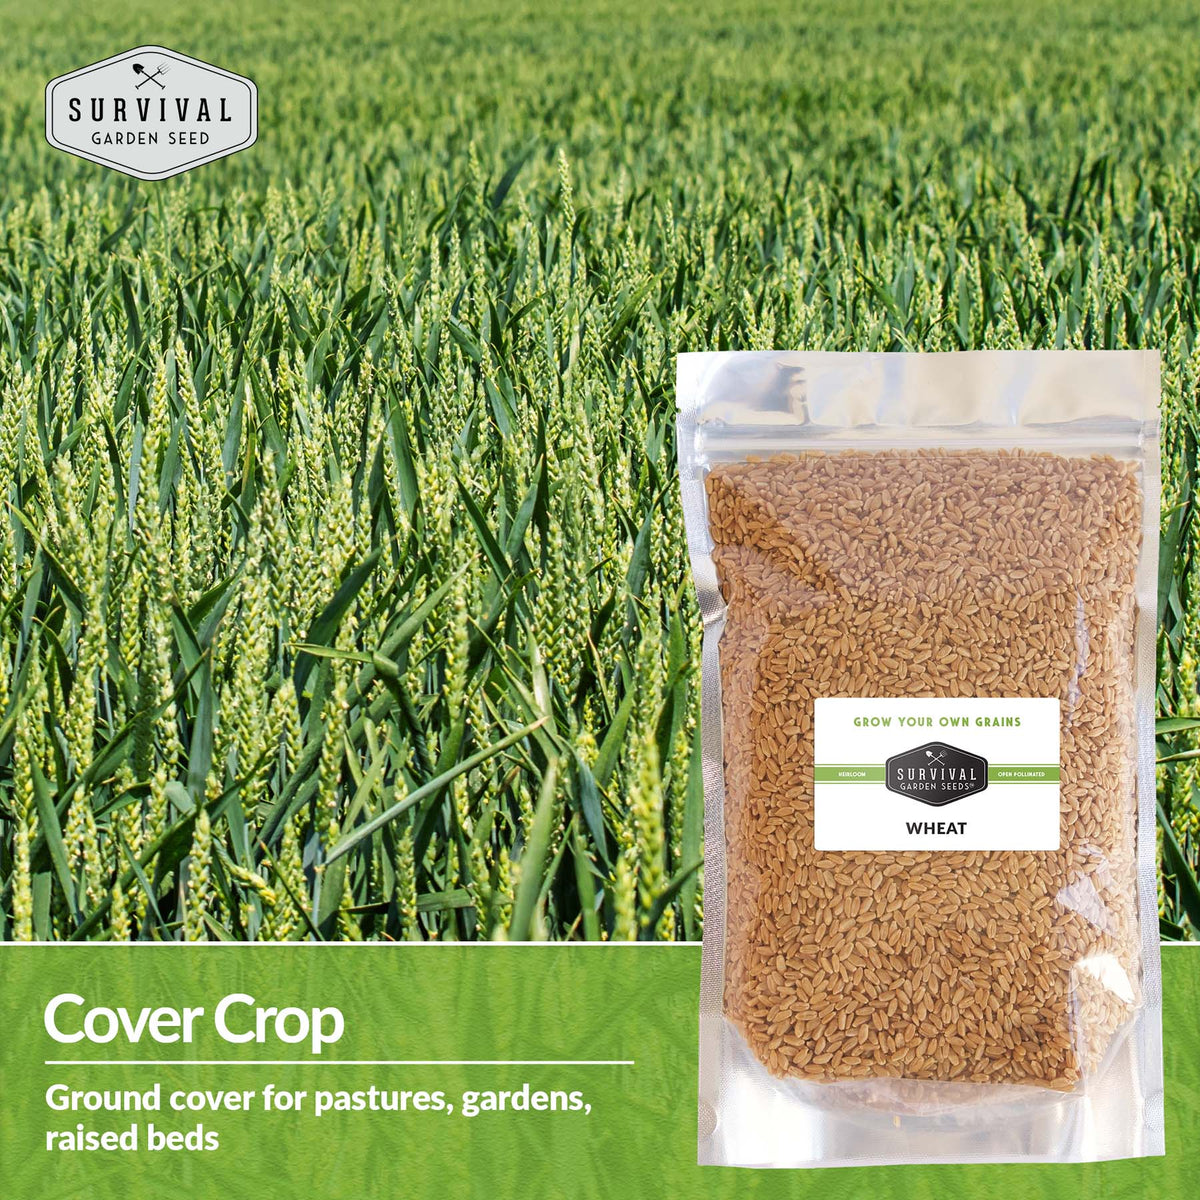 Wheat is a cover crop good for pastures, gardens and raised beds